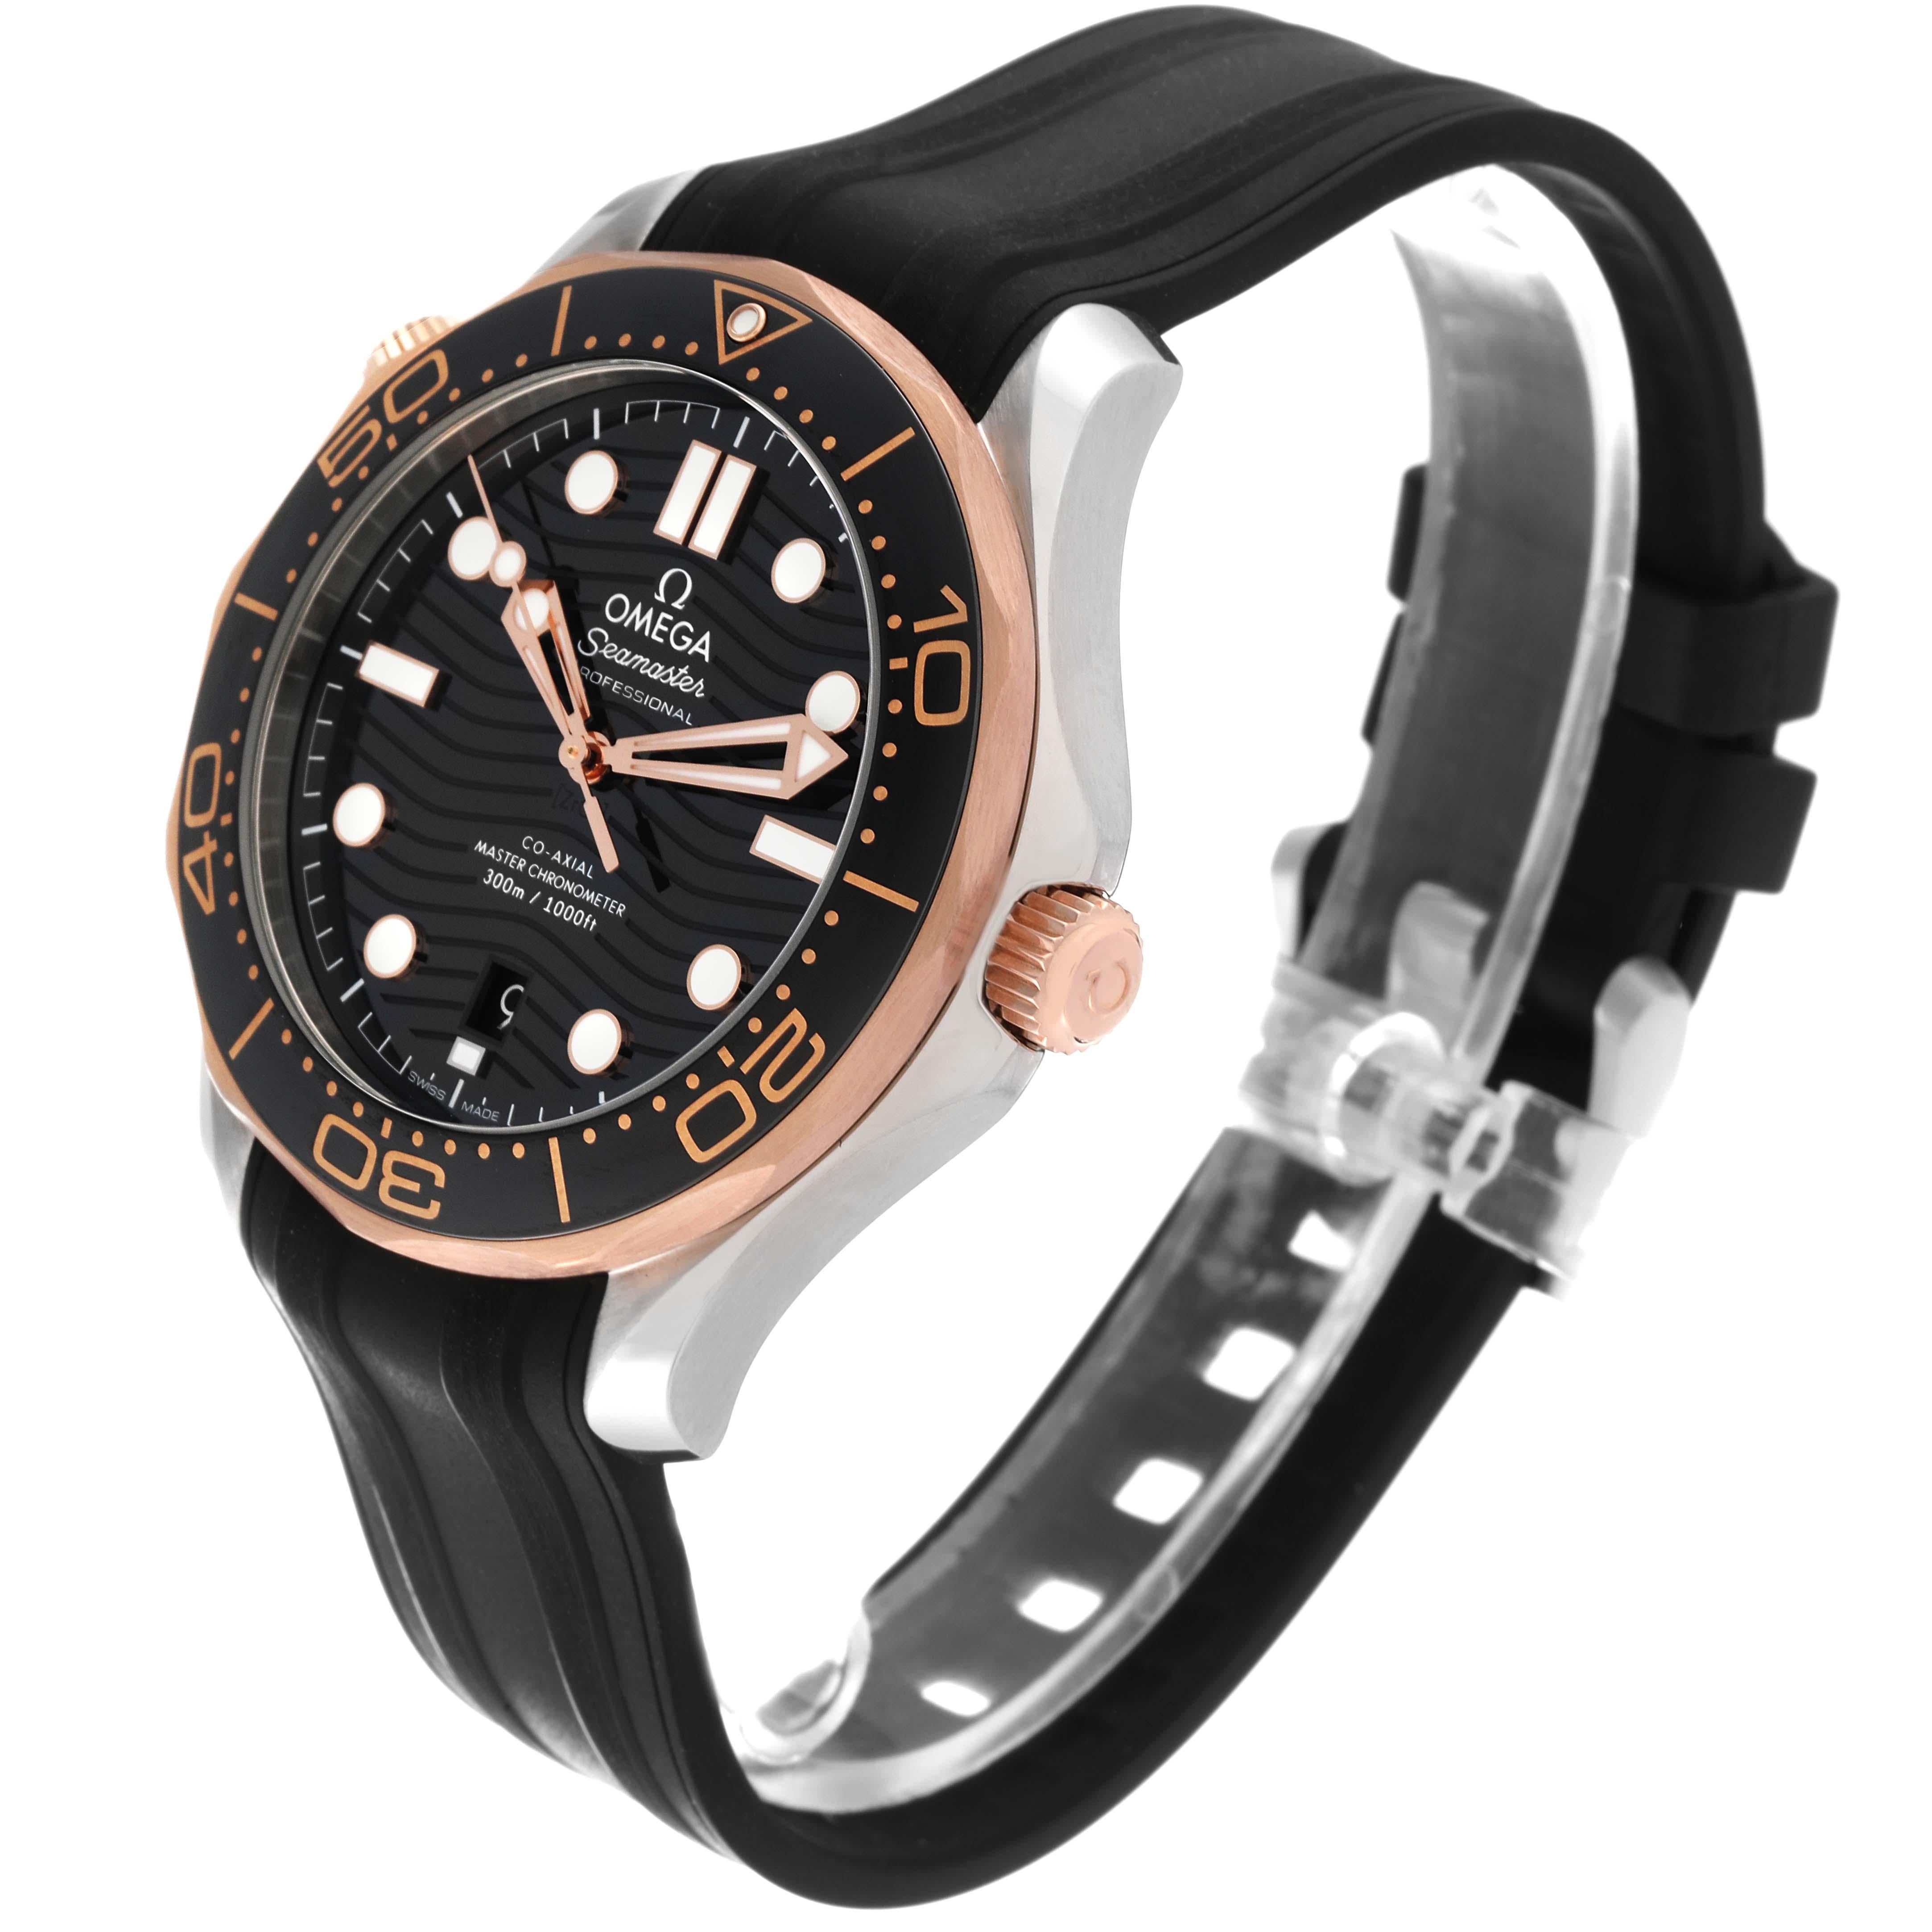 Omega Seamaster Diver Steel Rose Gold Mens Watch 210.22.42.20.01.002 Box Card. Automatic self-winding chronometer, Co-Axial Escapement movement. Certified Master Chronometer, approved by METAS, resistant to magnetic fields reaching 15,000 gauss.